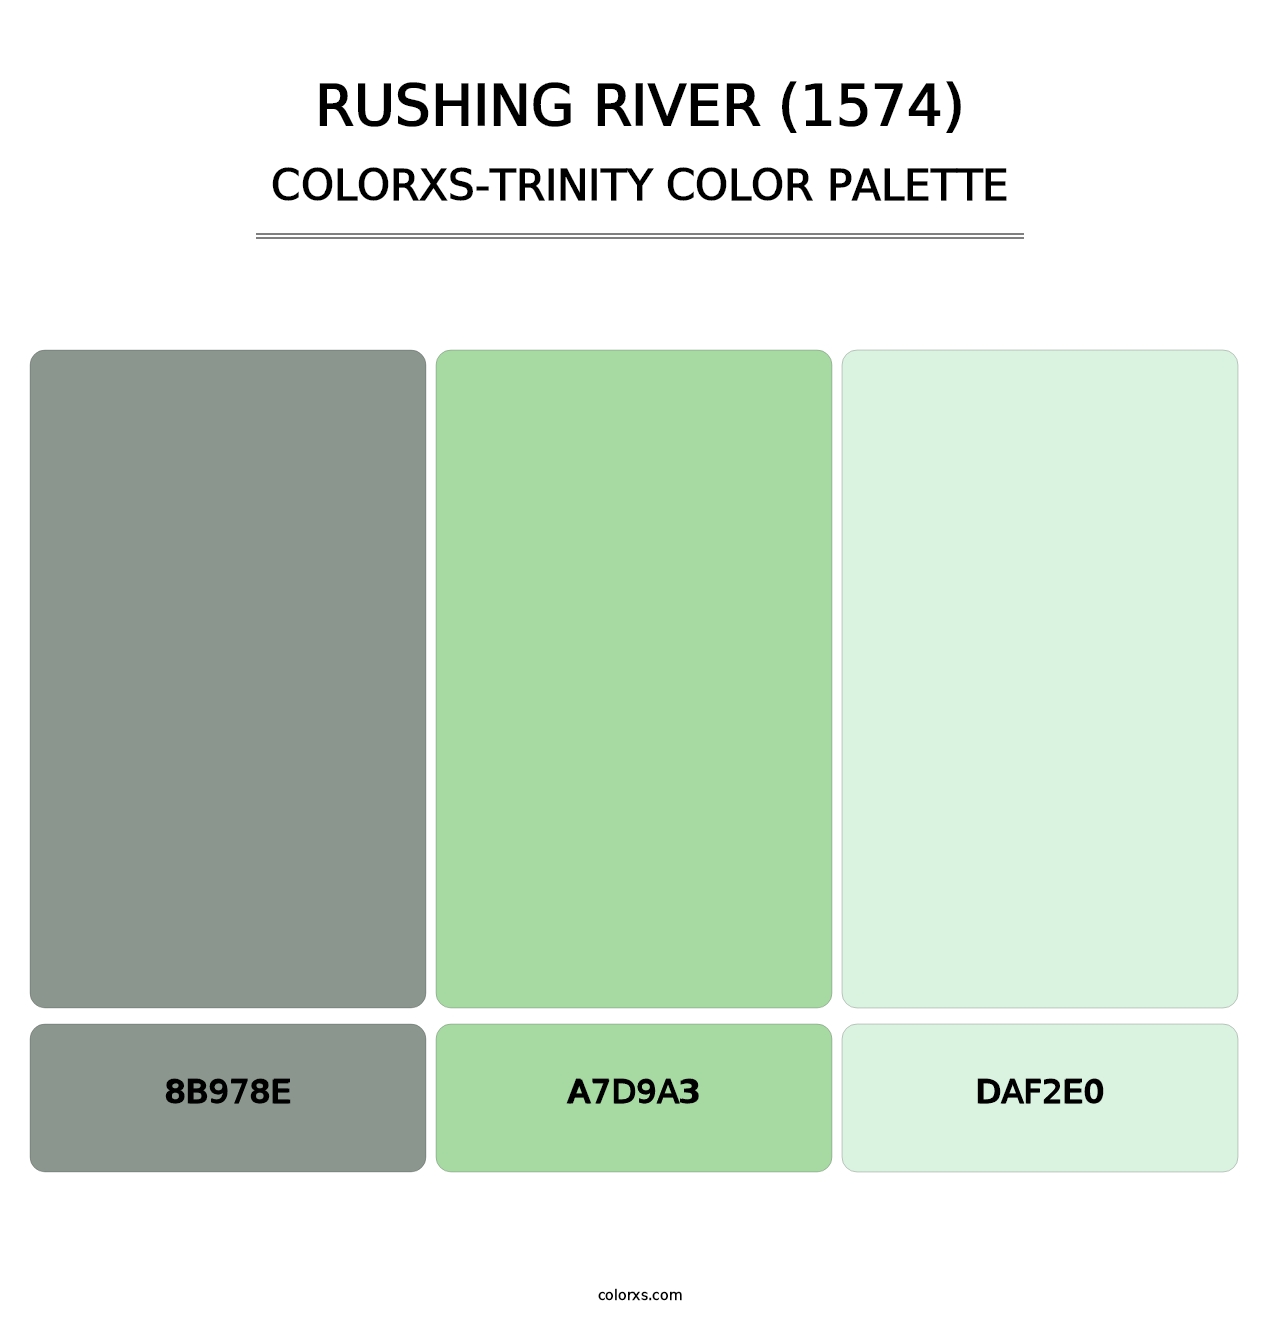 Rushing River (1574) - Colorxs Trinity Palette